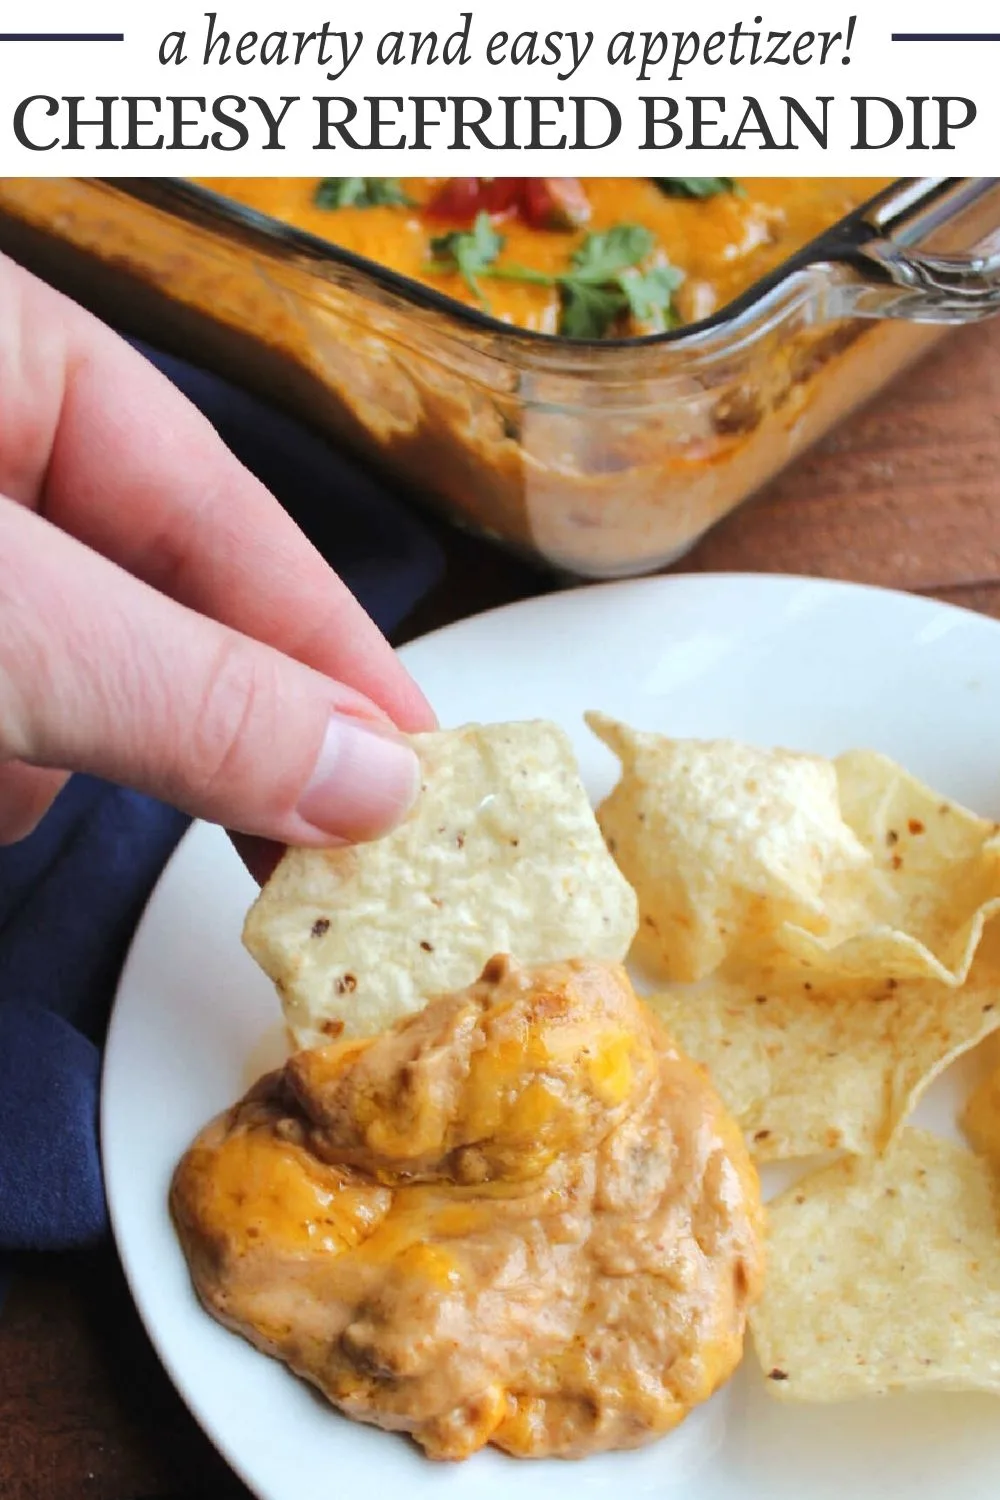 Cheesy refried bean dip is a creamy mixture of cheese, sour cream, beans and more. It is the perfect dip for tortilla chips and is great for game day or as an appetizer for a Tex-Mex feast.